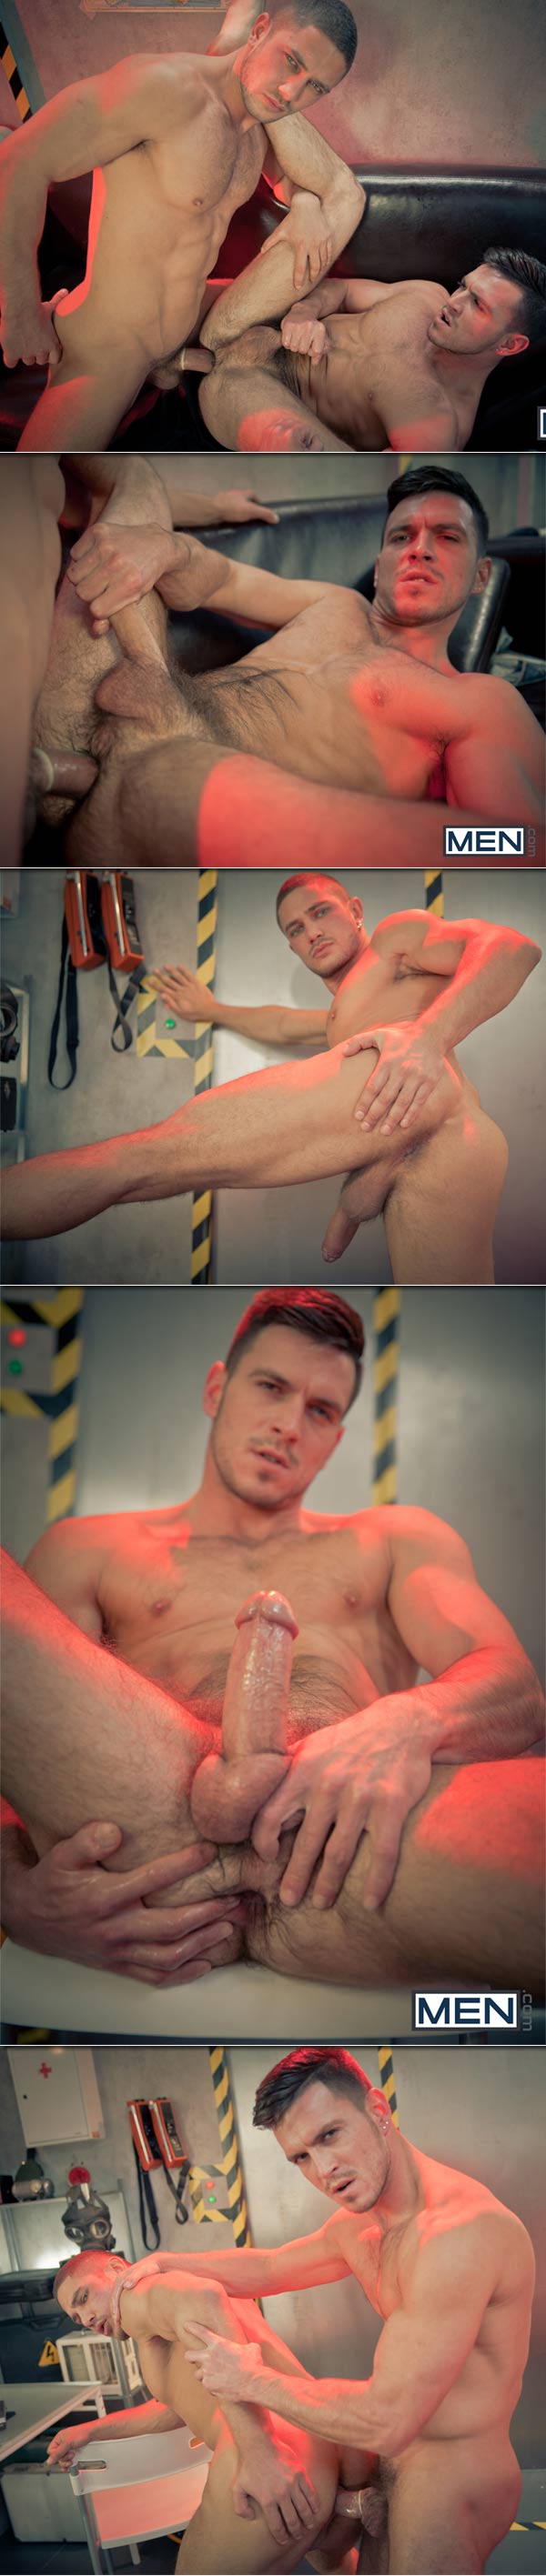 The End (Paddy O'Brian & Dato Foland) (Flip-Flop) (Part 1) at Drill My Hole